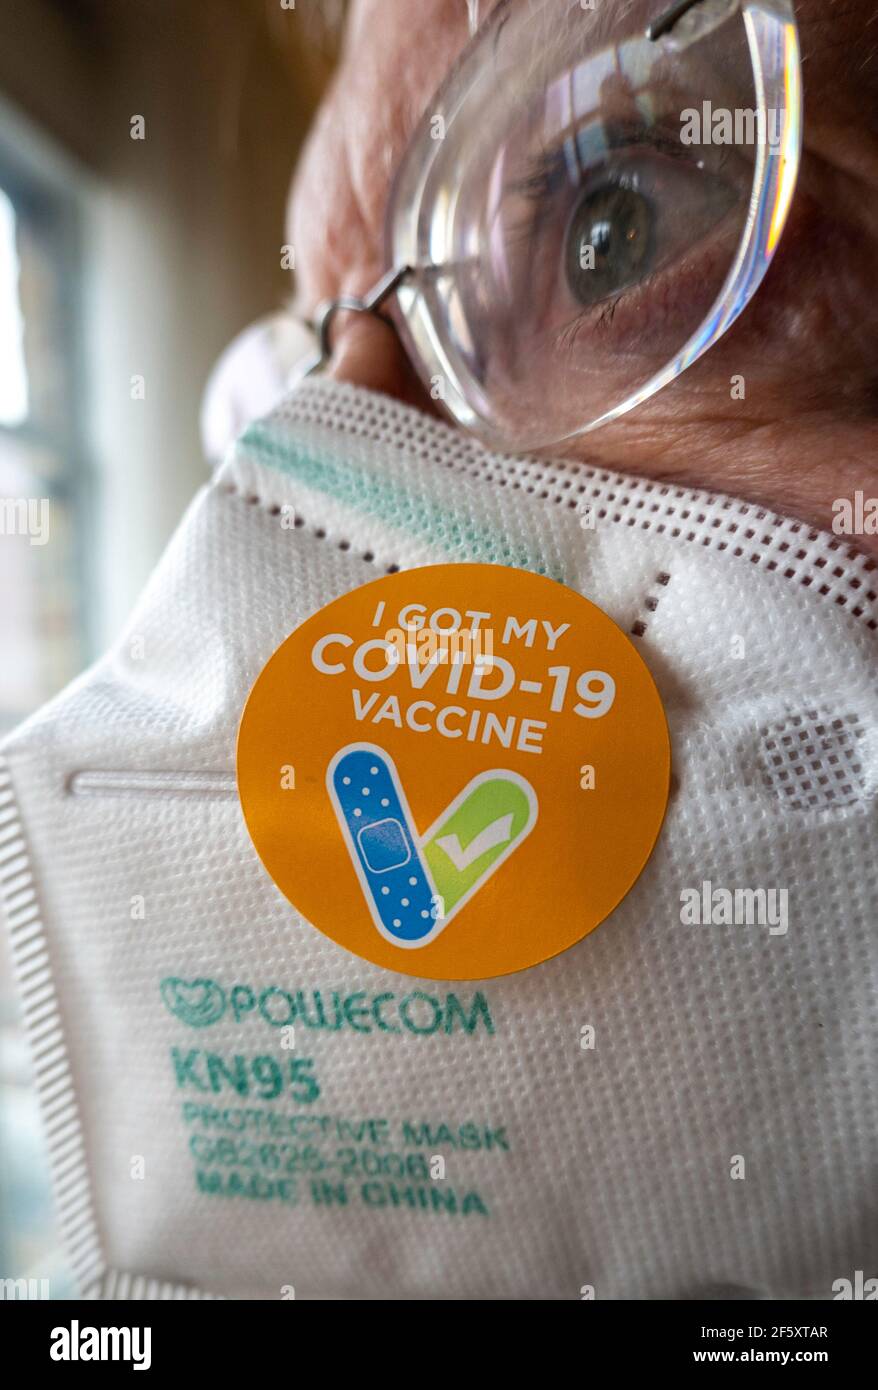 Senior man with an 'I got my COVID-19 vaccine' sticker on his KN95 protective mask, United States Stock Photo